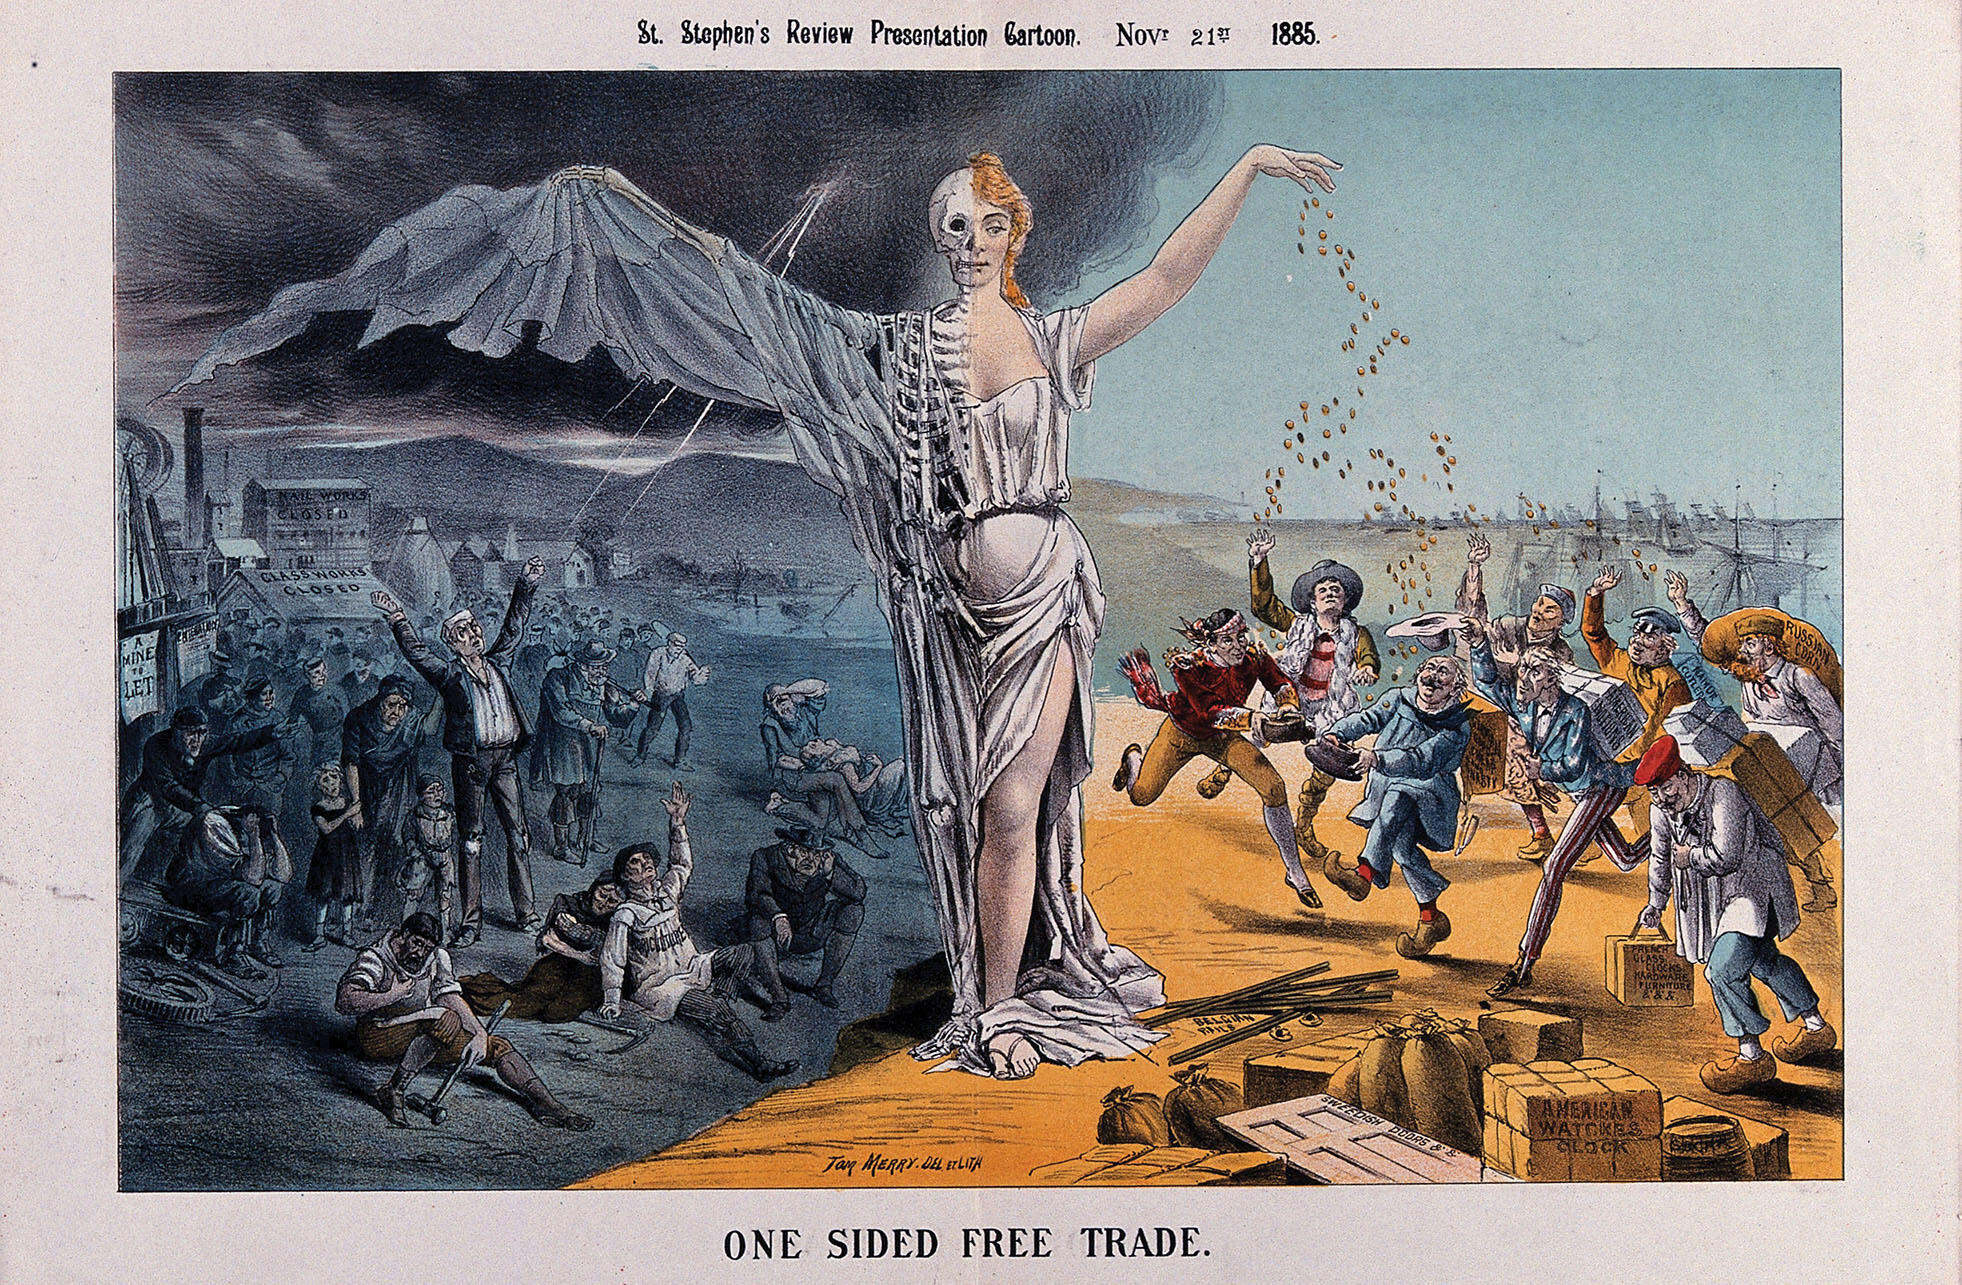 A half-woman half-skeleton figure presides as jobless English workers suffer as merchants are made rich by free trade in this cartoon from 1885. (Image courtesy of the Wellcome Library/Wikimedia.)